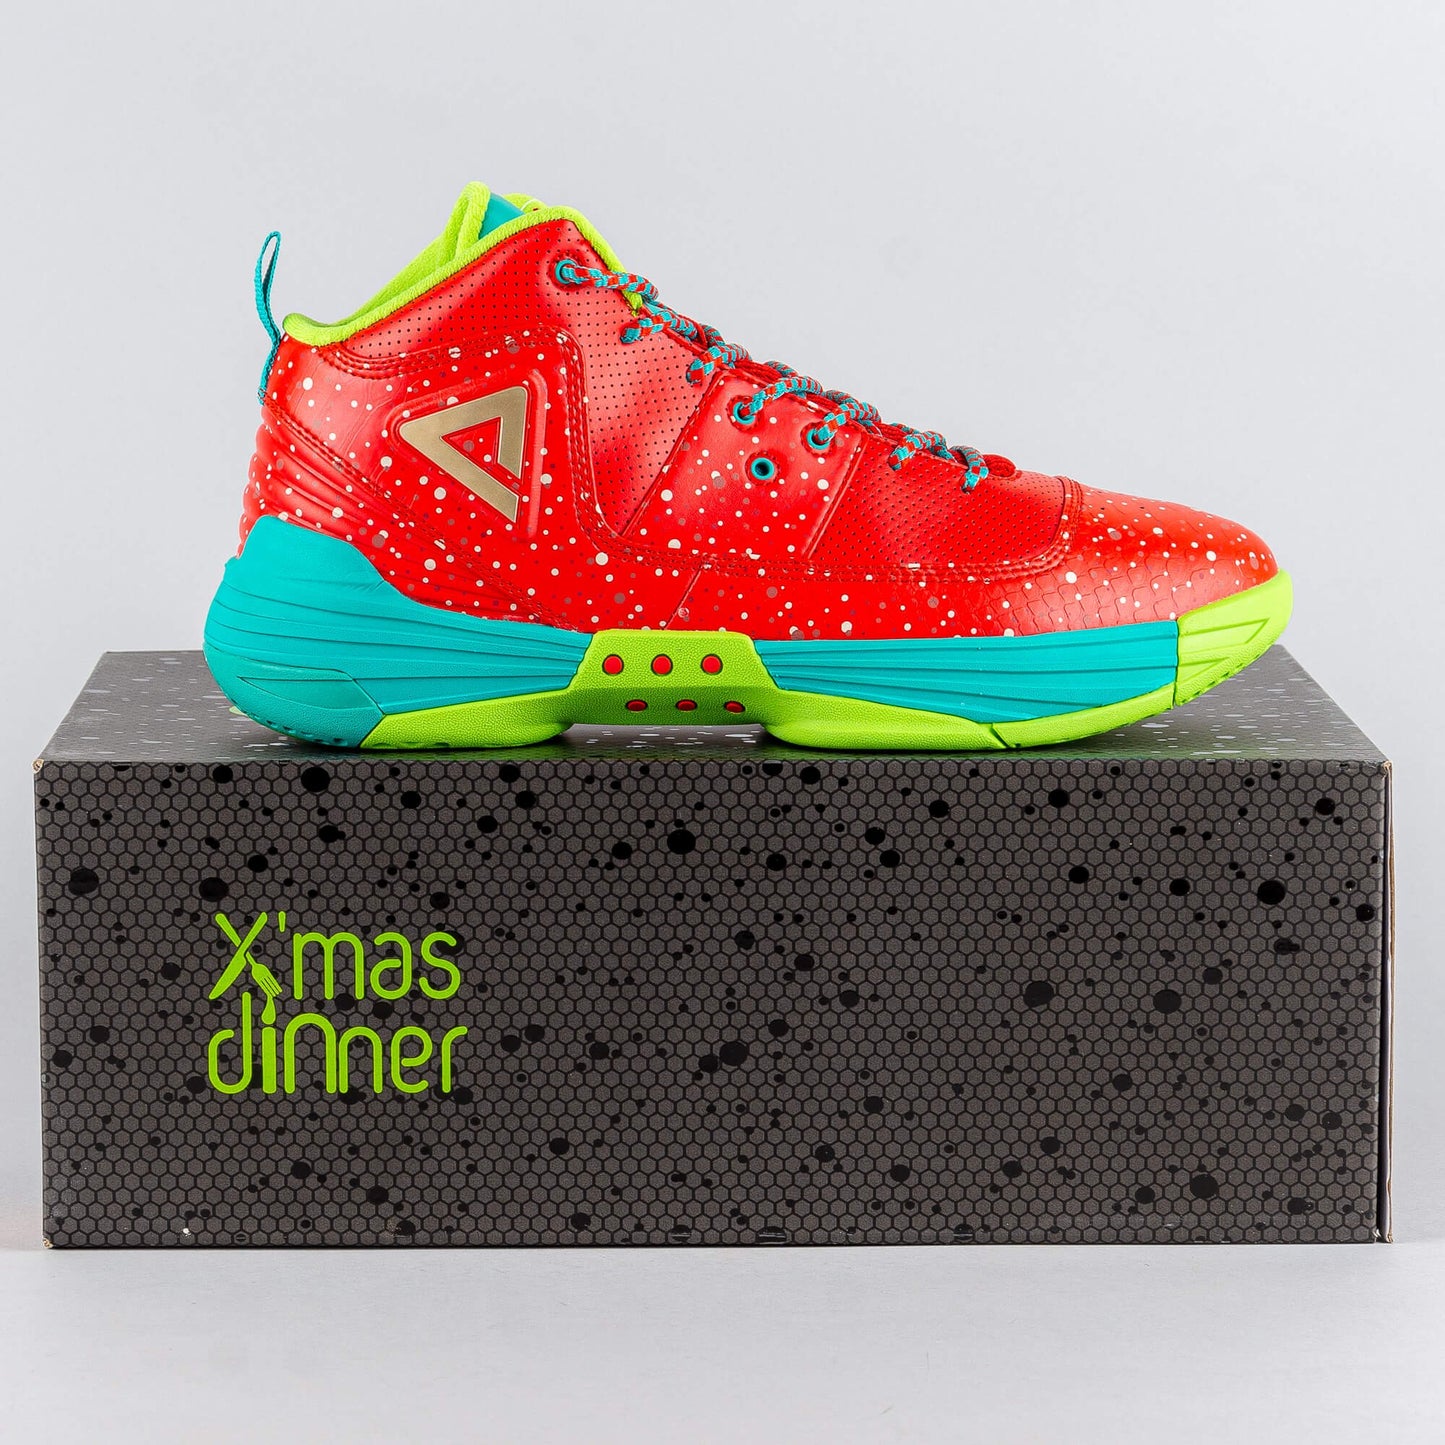 Peak Basketball Shoes George Hill GH3 Monster Christmas PE Red/Green